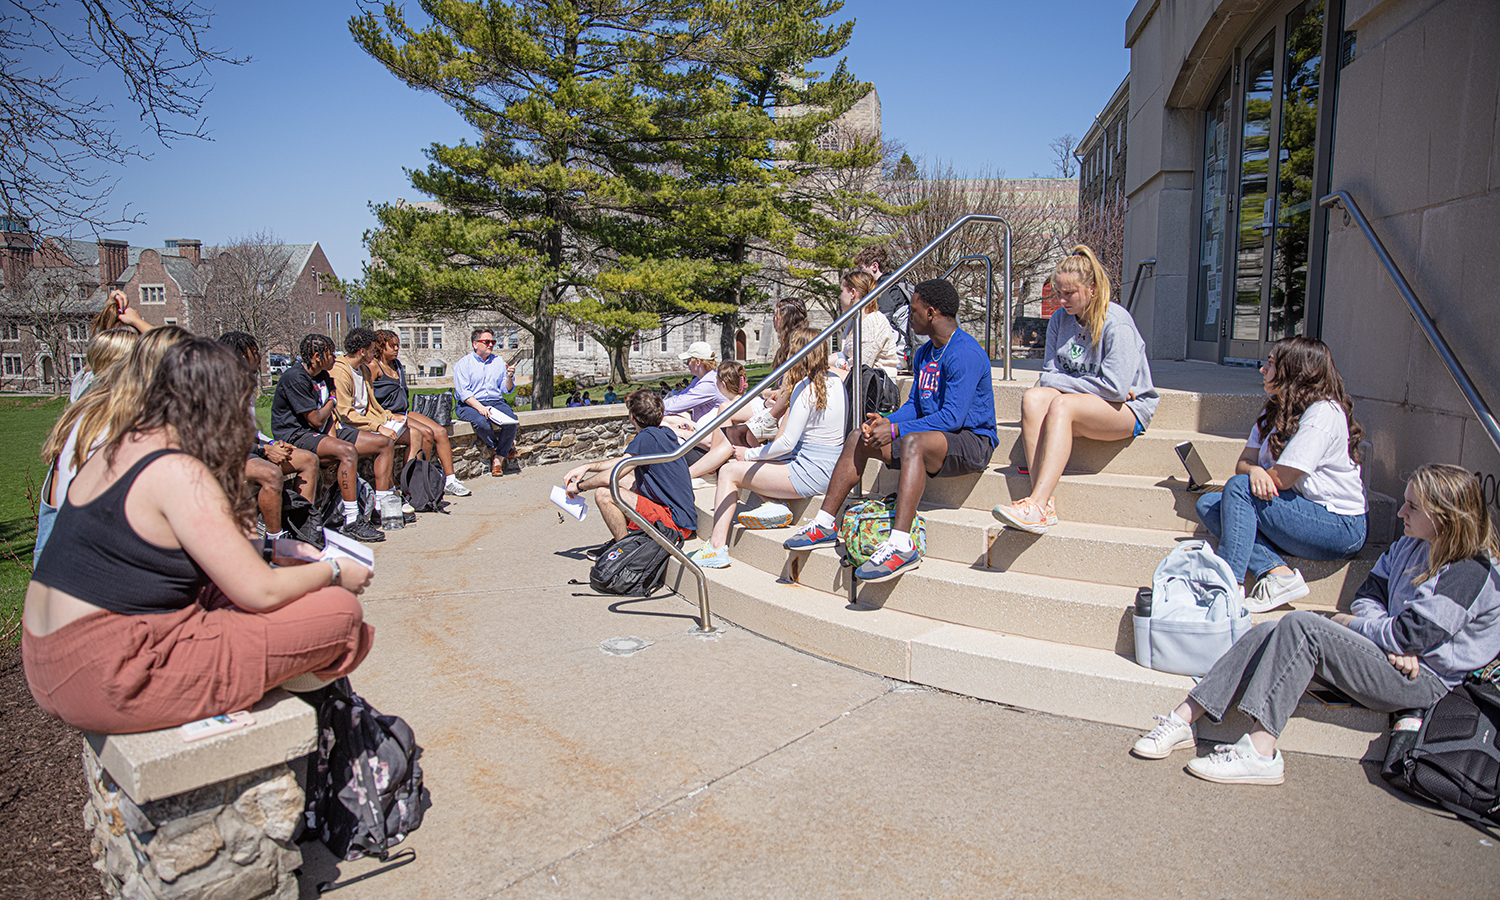 Taking advantage of the warm weather, Director of Teacher Education Program and Secondary Education Andie Huskie holds class on the steps of the Salisbury Center at Trinity Hall.